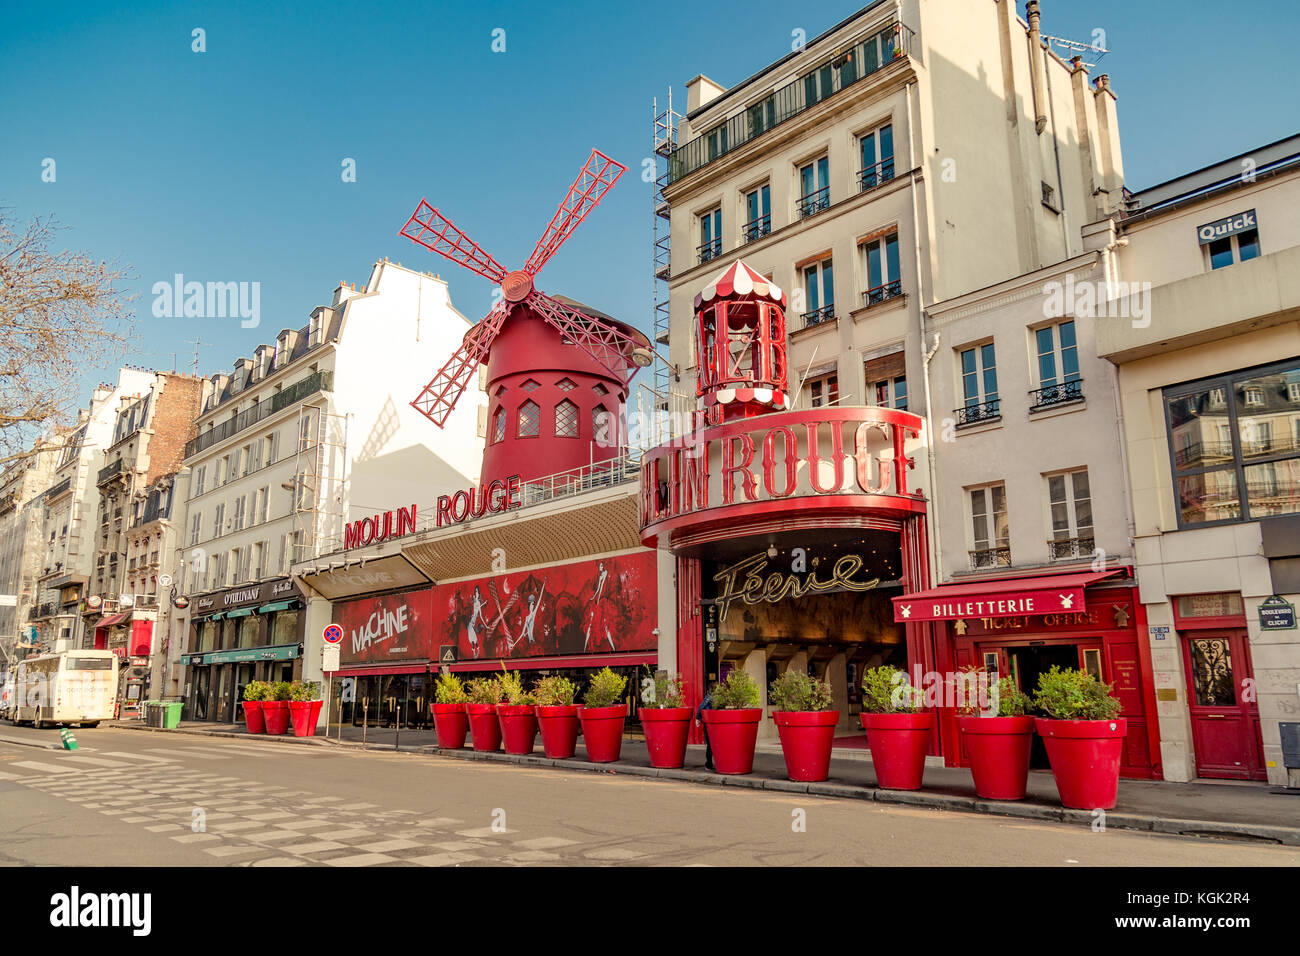 Paris, France, March 31 2017: Moulin Rouge is a famous cabaret built in 1889, locating in the Paris red-light district of Pigalle Stock Photo